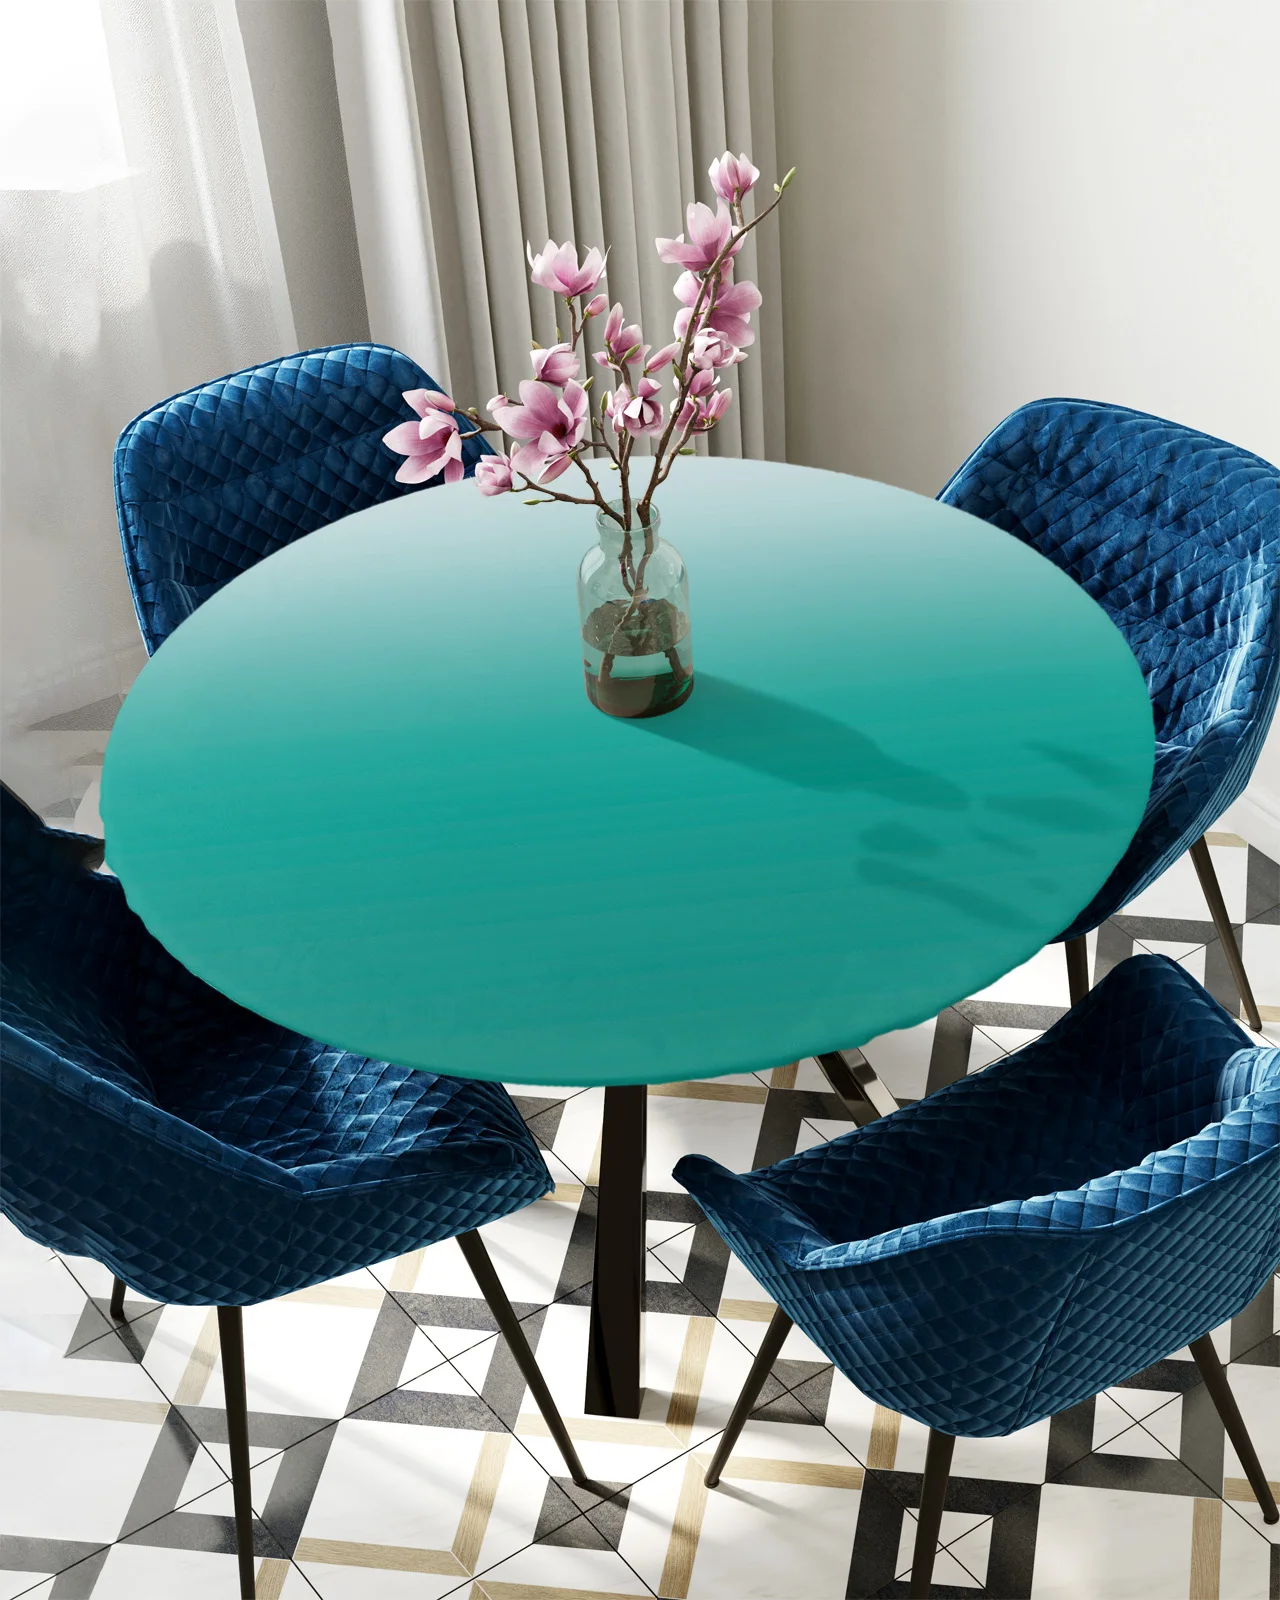 

Cyan Turquoise Gradient Ombre Round Rectangular Table Cover Waterproof Elastic Tablecloth For Kitchen Table Cloth Home Decor